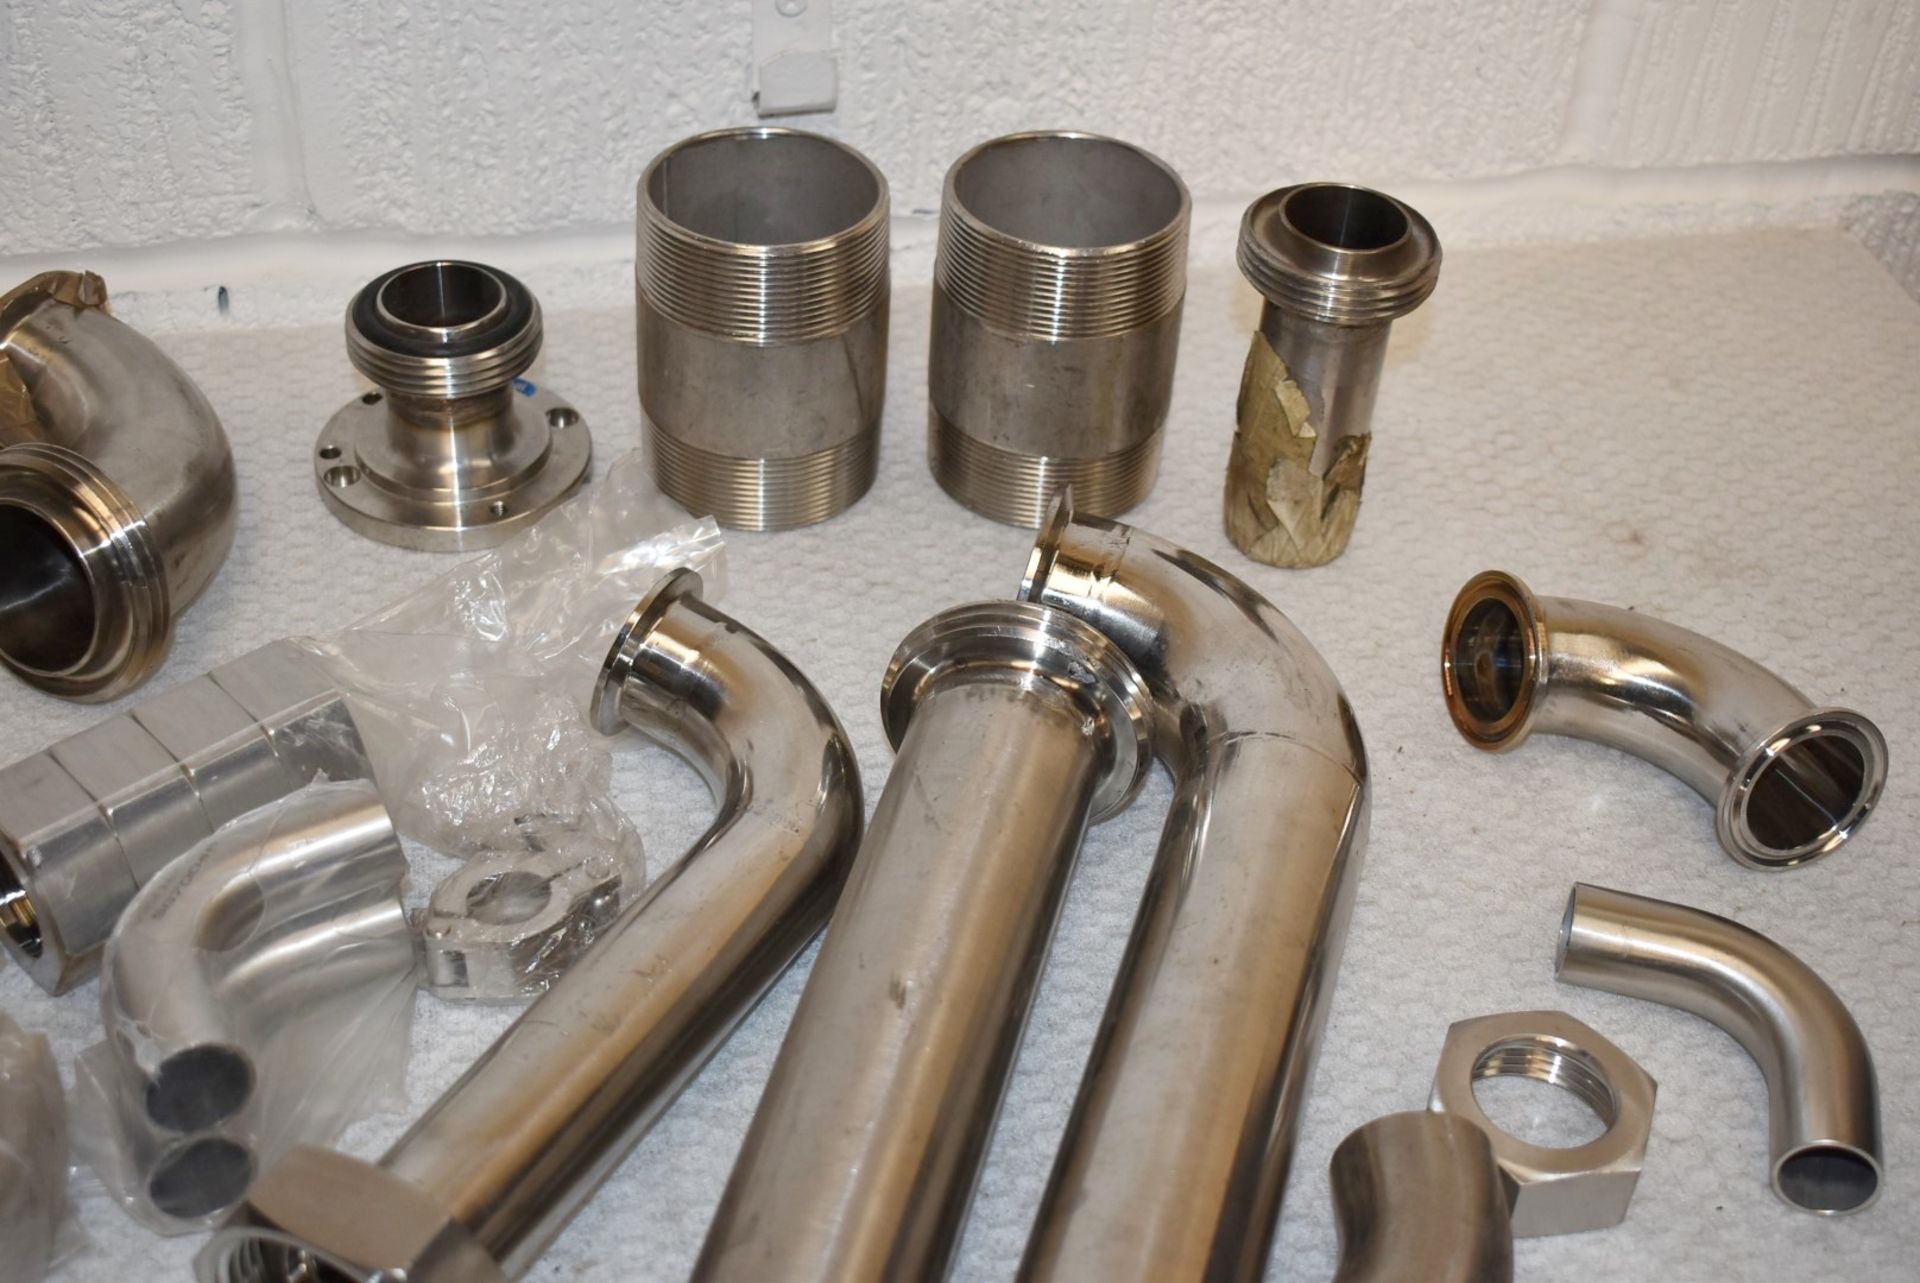 Assorted Job Lot of Stainless Steel Fittings For Brewery Equipment - Includes Approx 38 Pieces - - Image 12 of 13